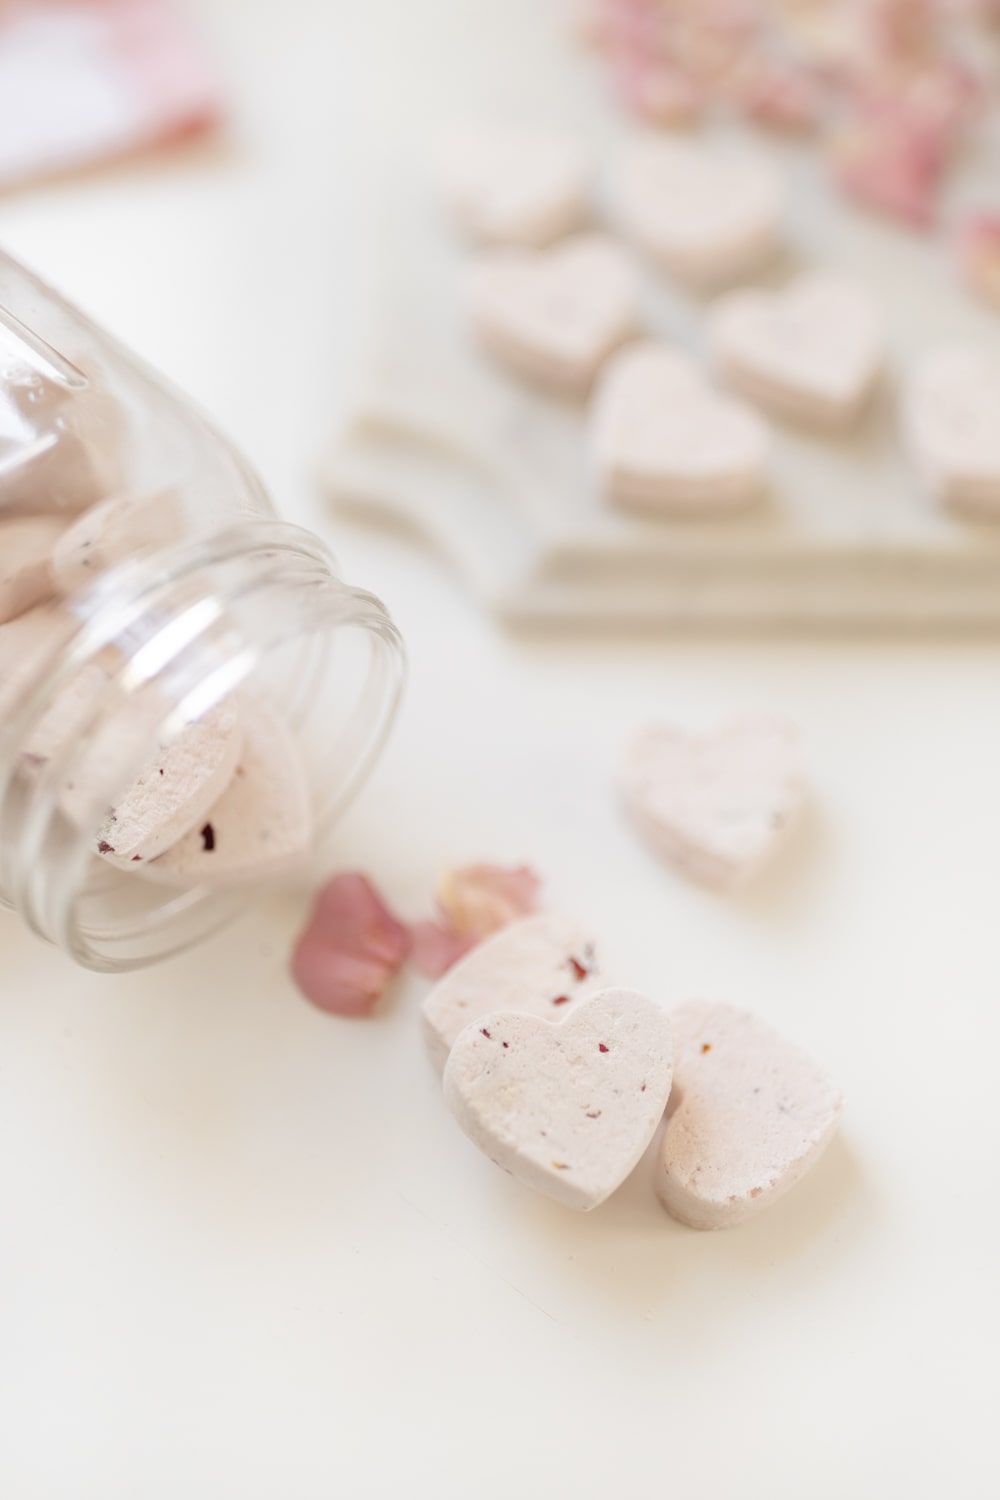 Shower melts DIY from blogger Stephanie Ziajka on Diary of a Debutante